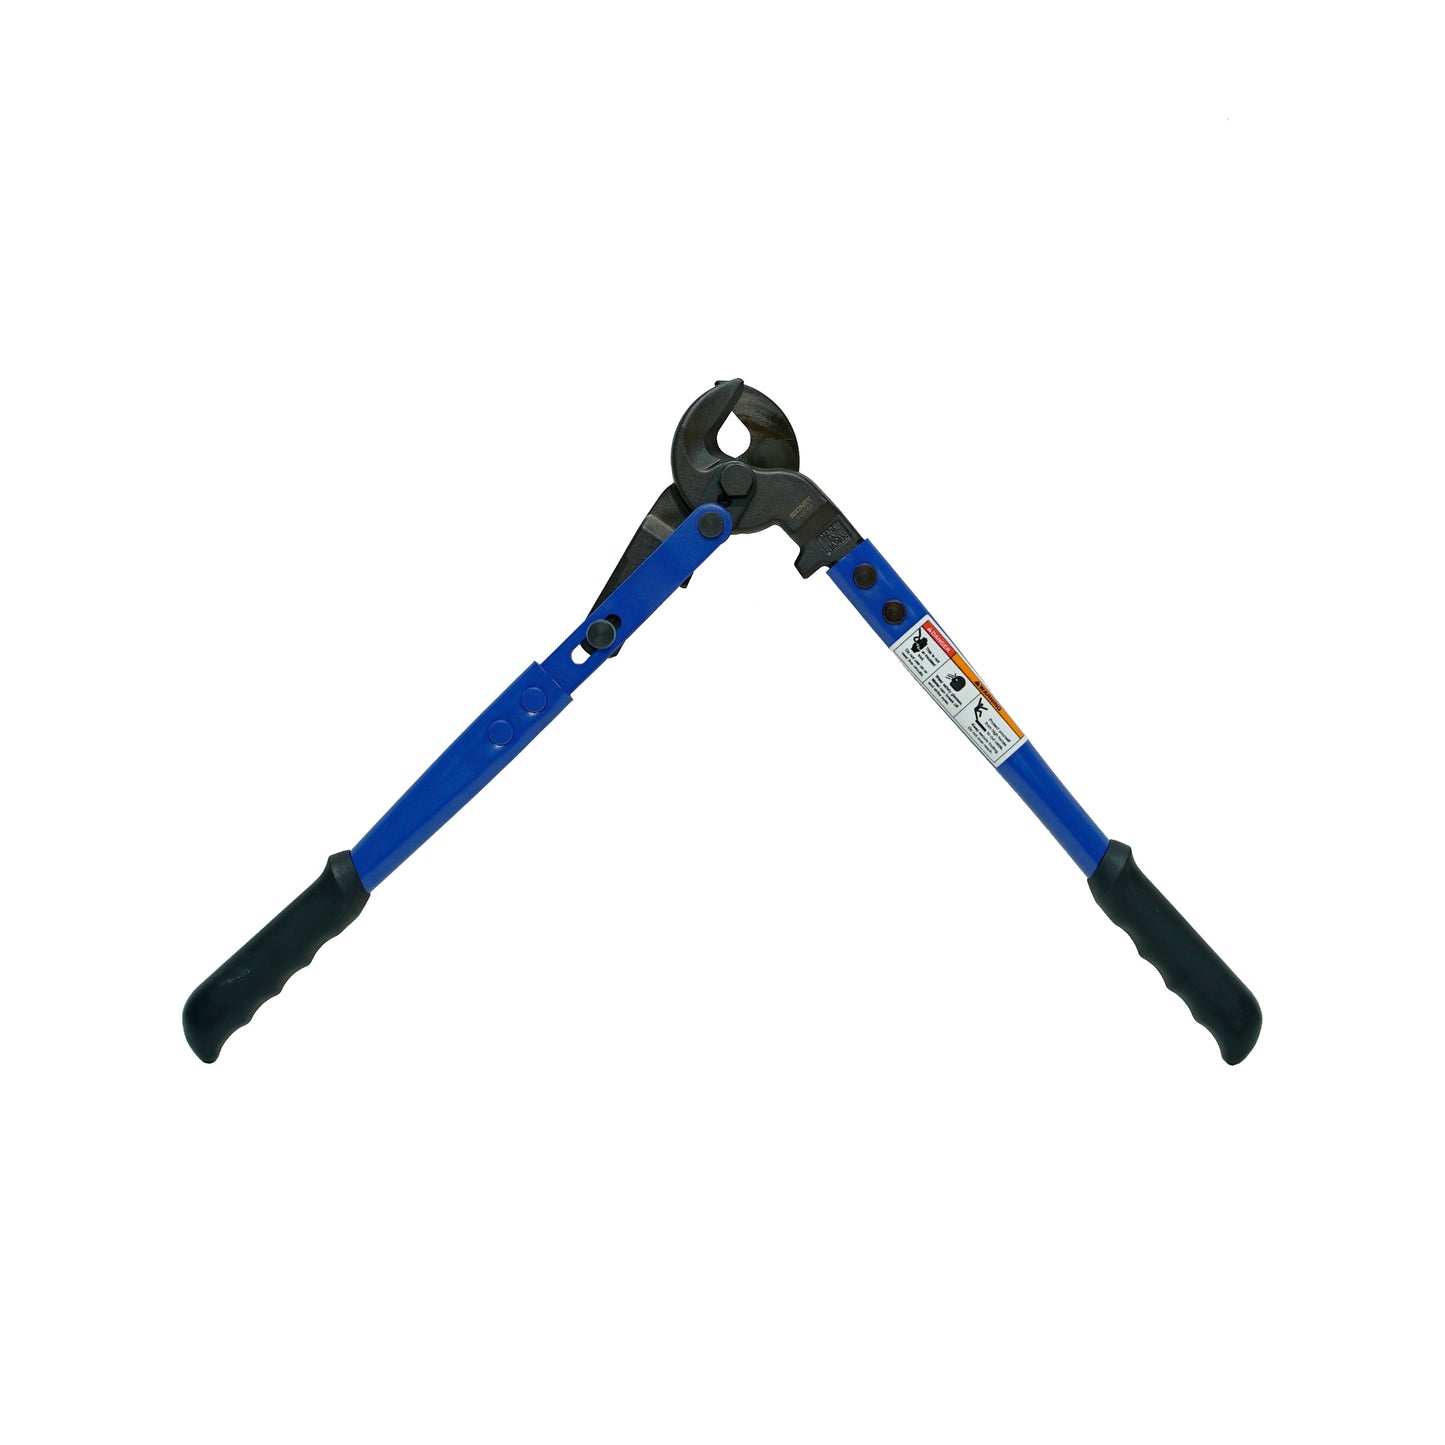 [ New Idea! Lever-Type ] High-Leverage Cable Cutter 450MM(18") | MADE IN JAPAN | UCC-18HL